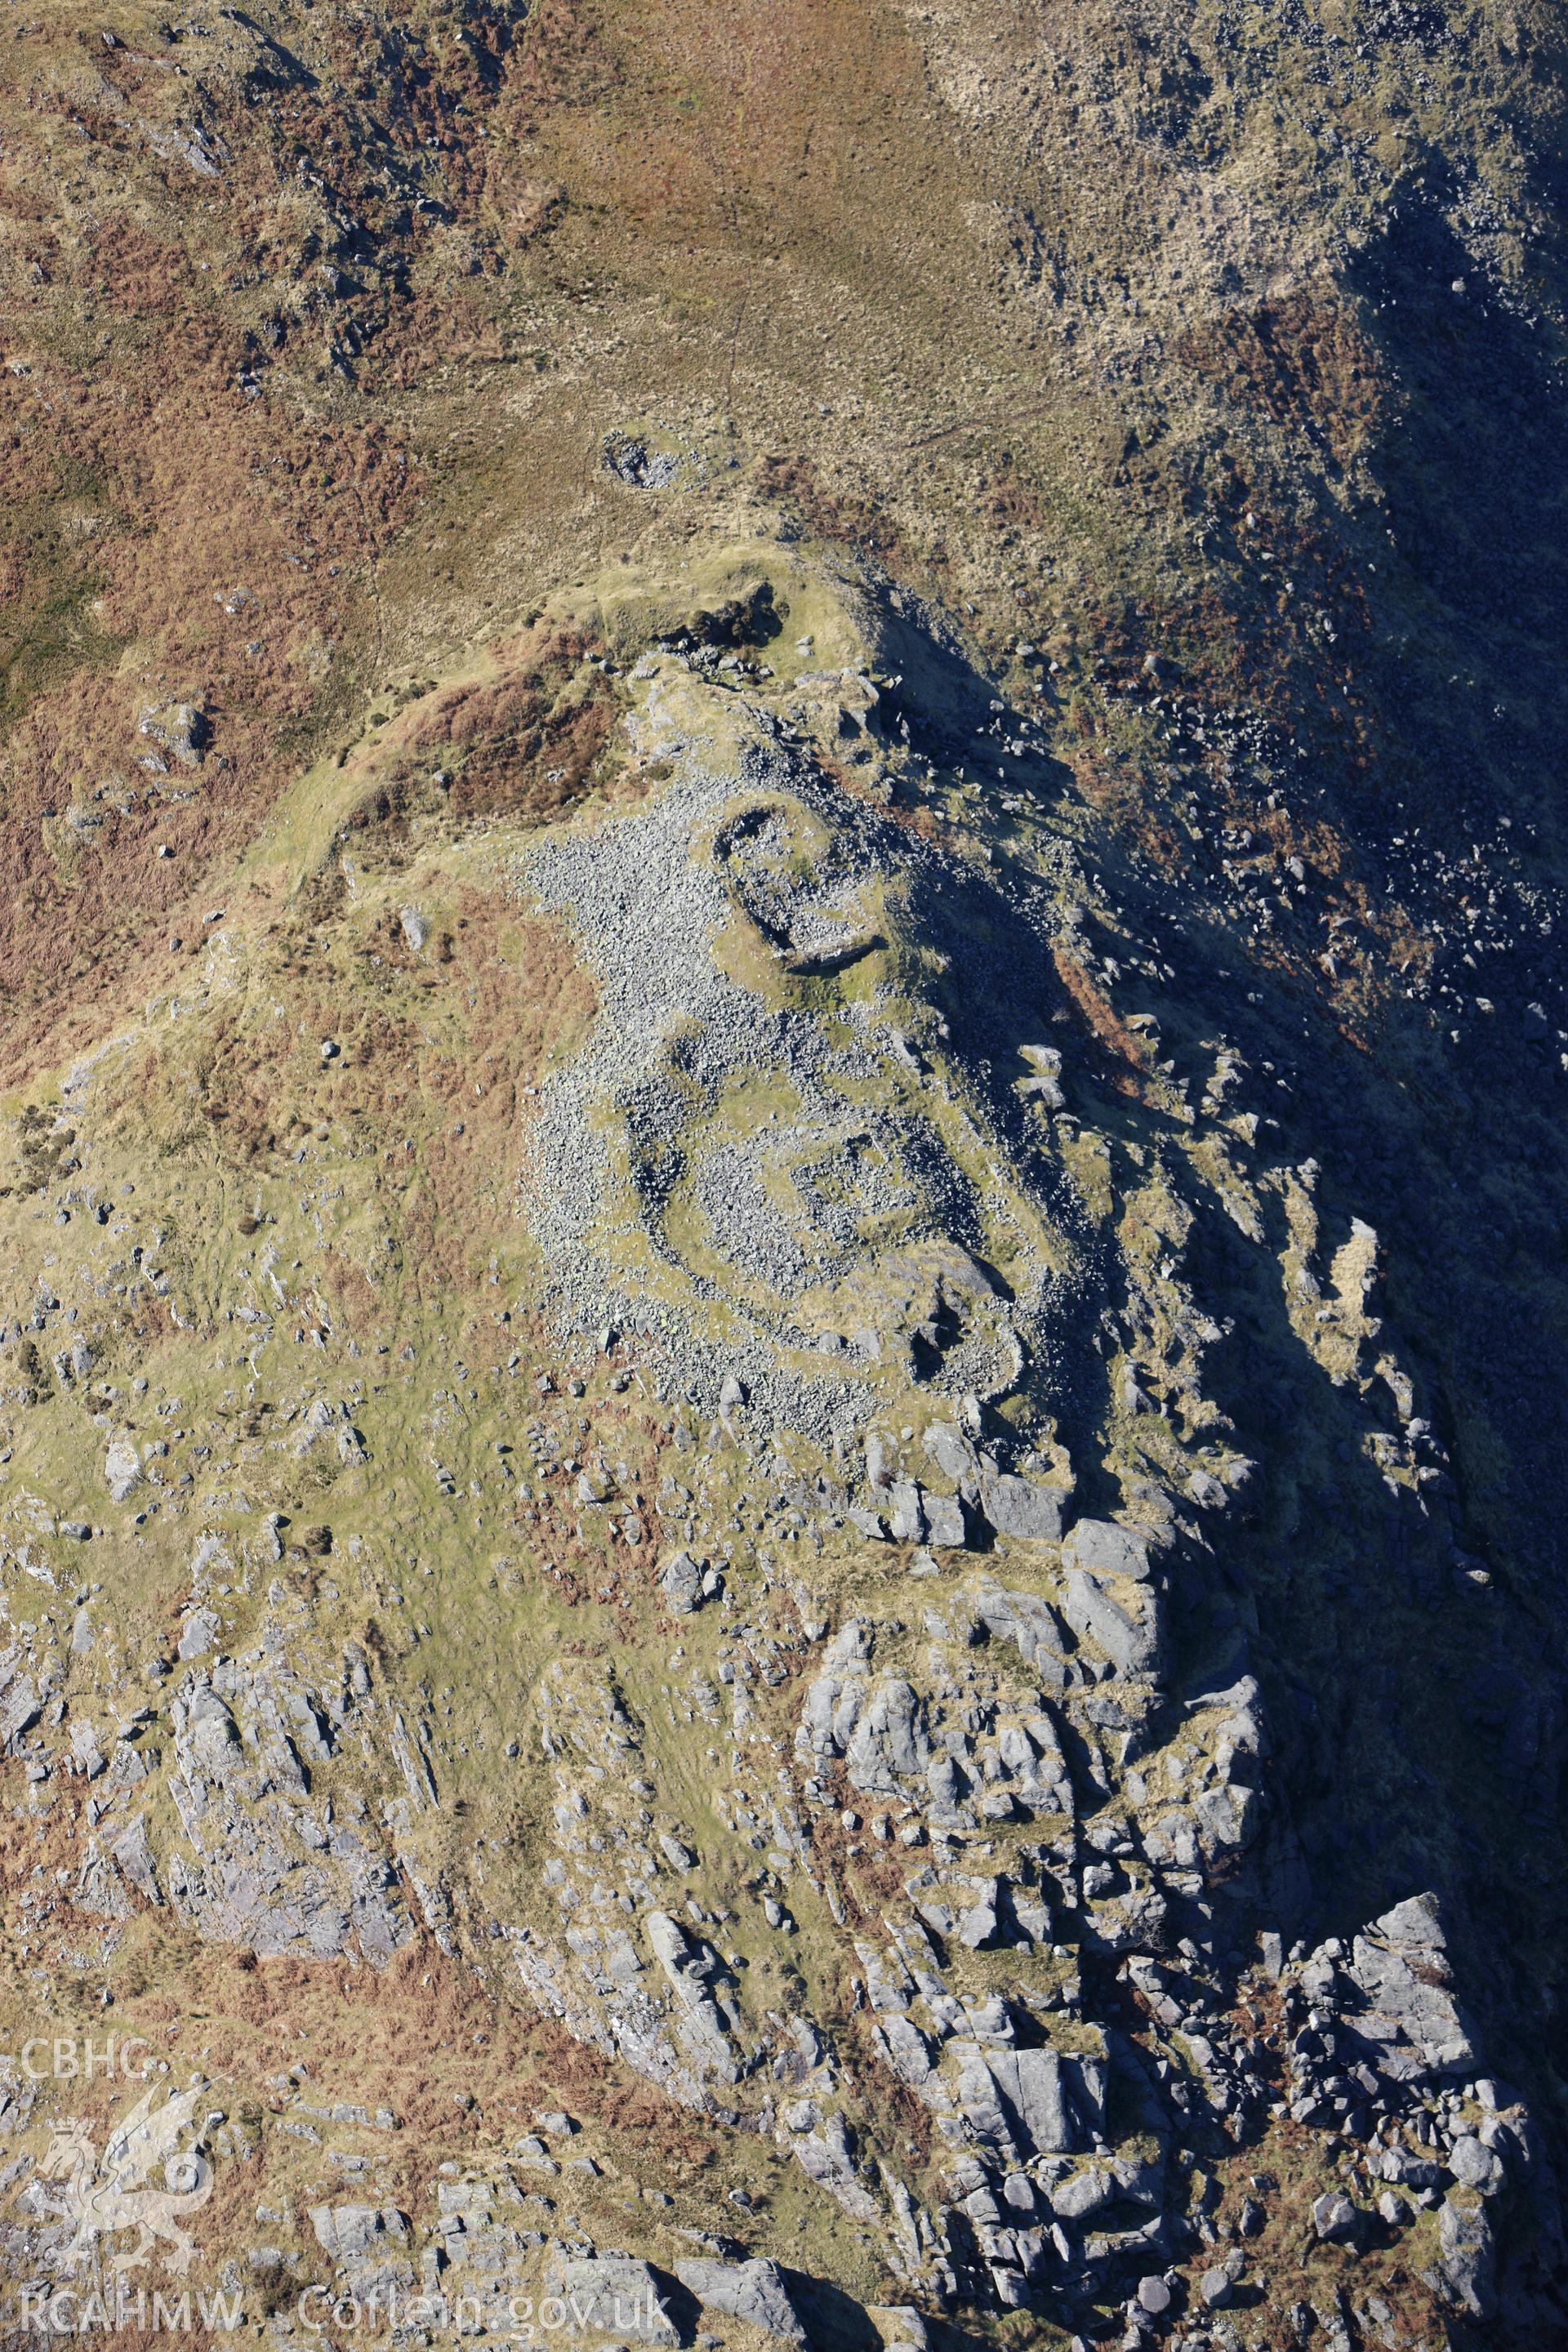 RCAHMW colour oblique photograph of Castell Carndochan, Dolhendre. Taken by Toby Driver on 08/03/2010.